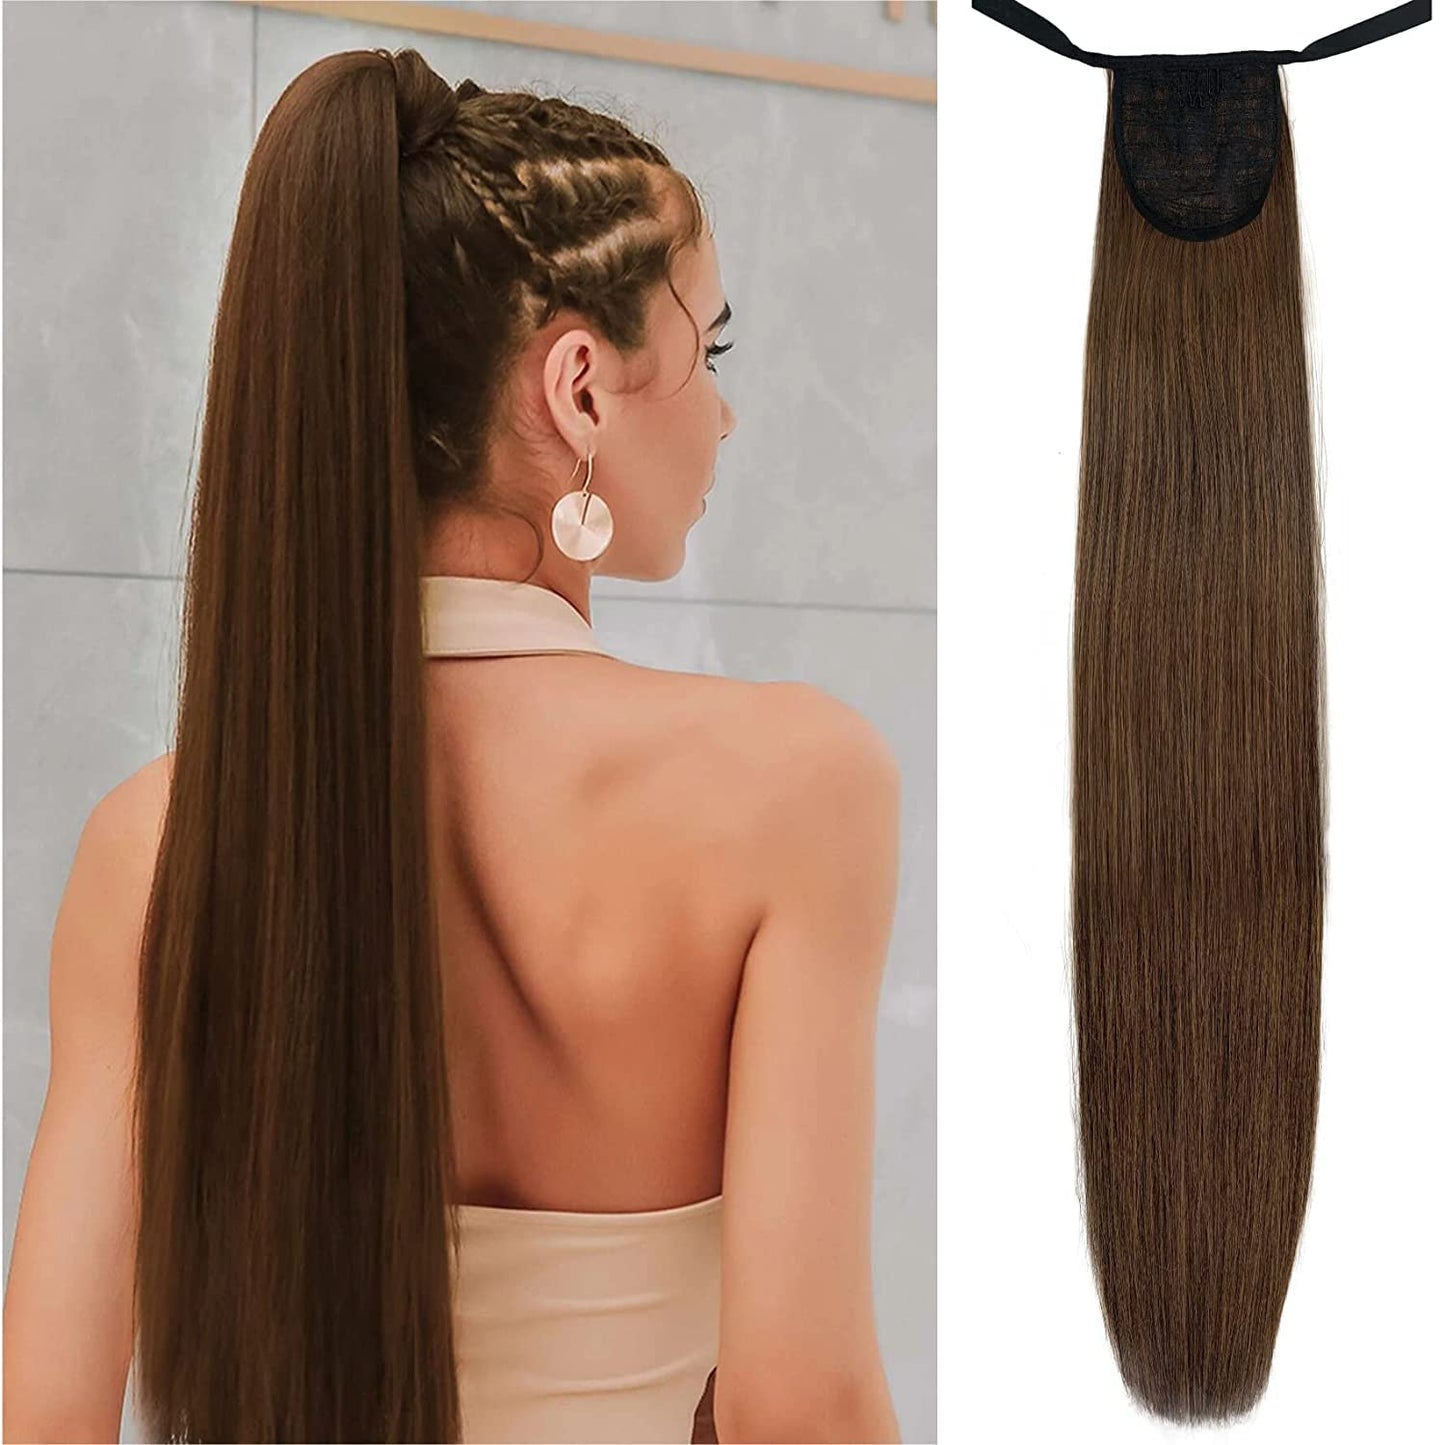 Ponytail Clip in Hair Extensions Hairpiece Pony Tail Synthetic Hair Accessories